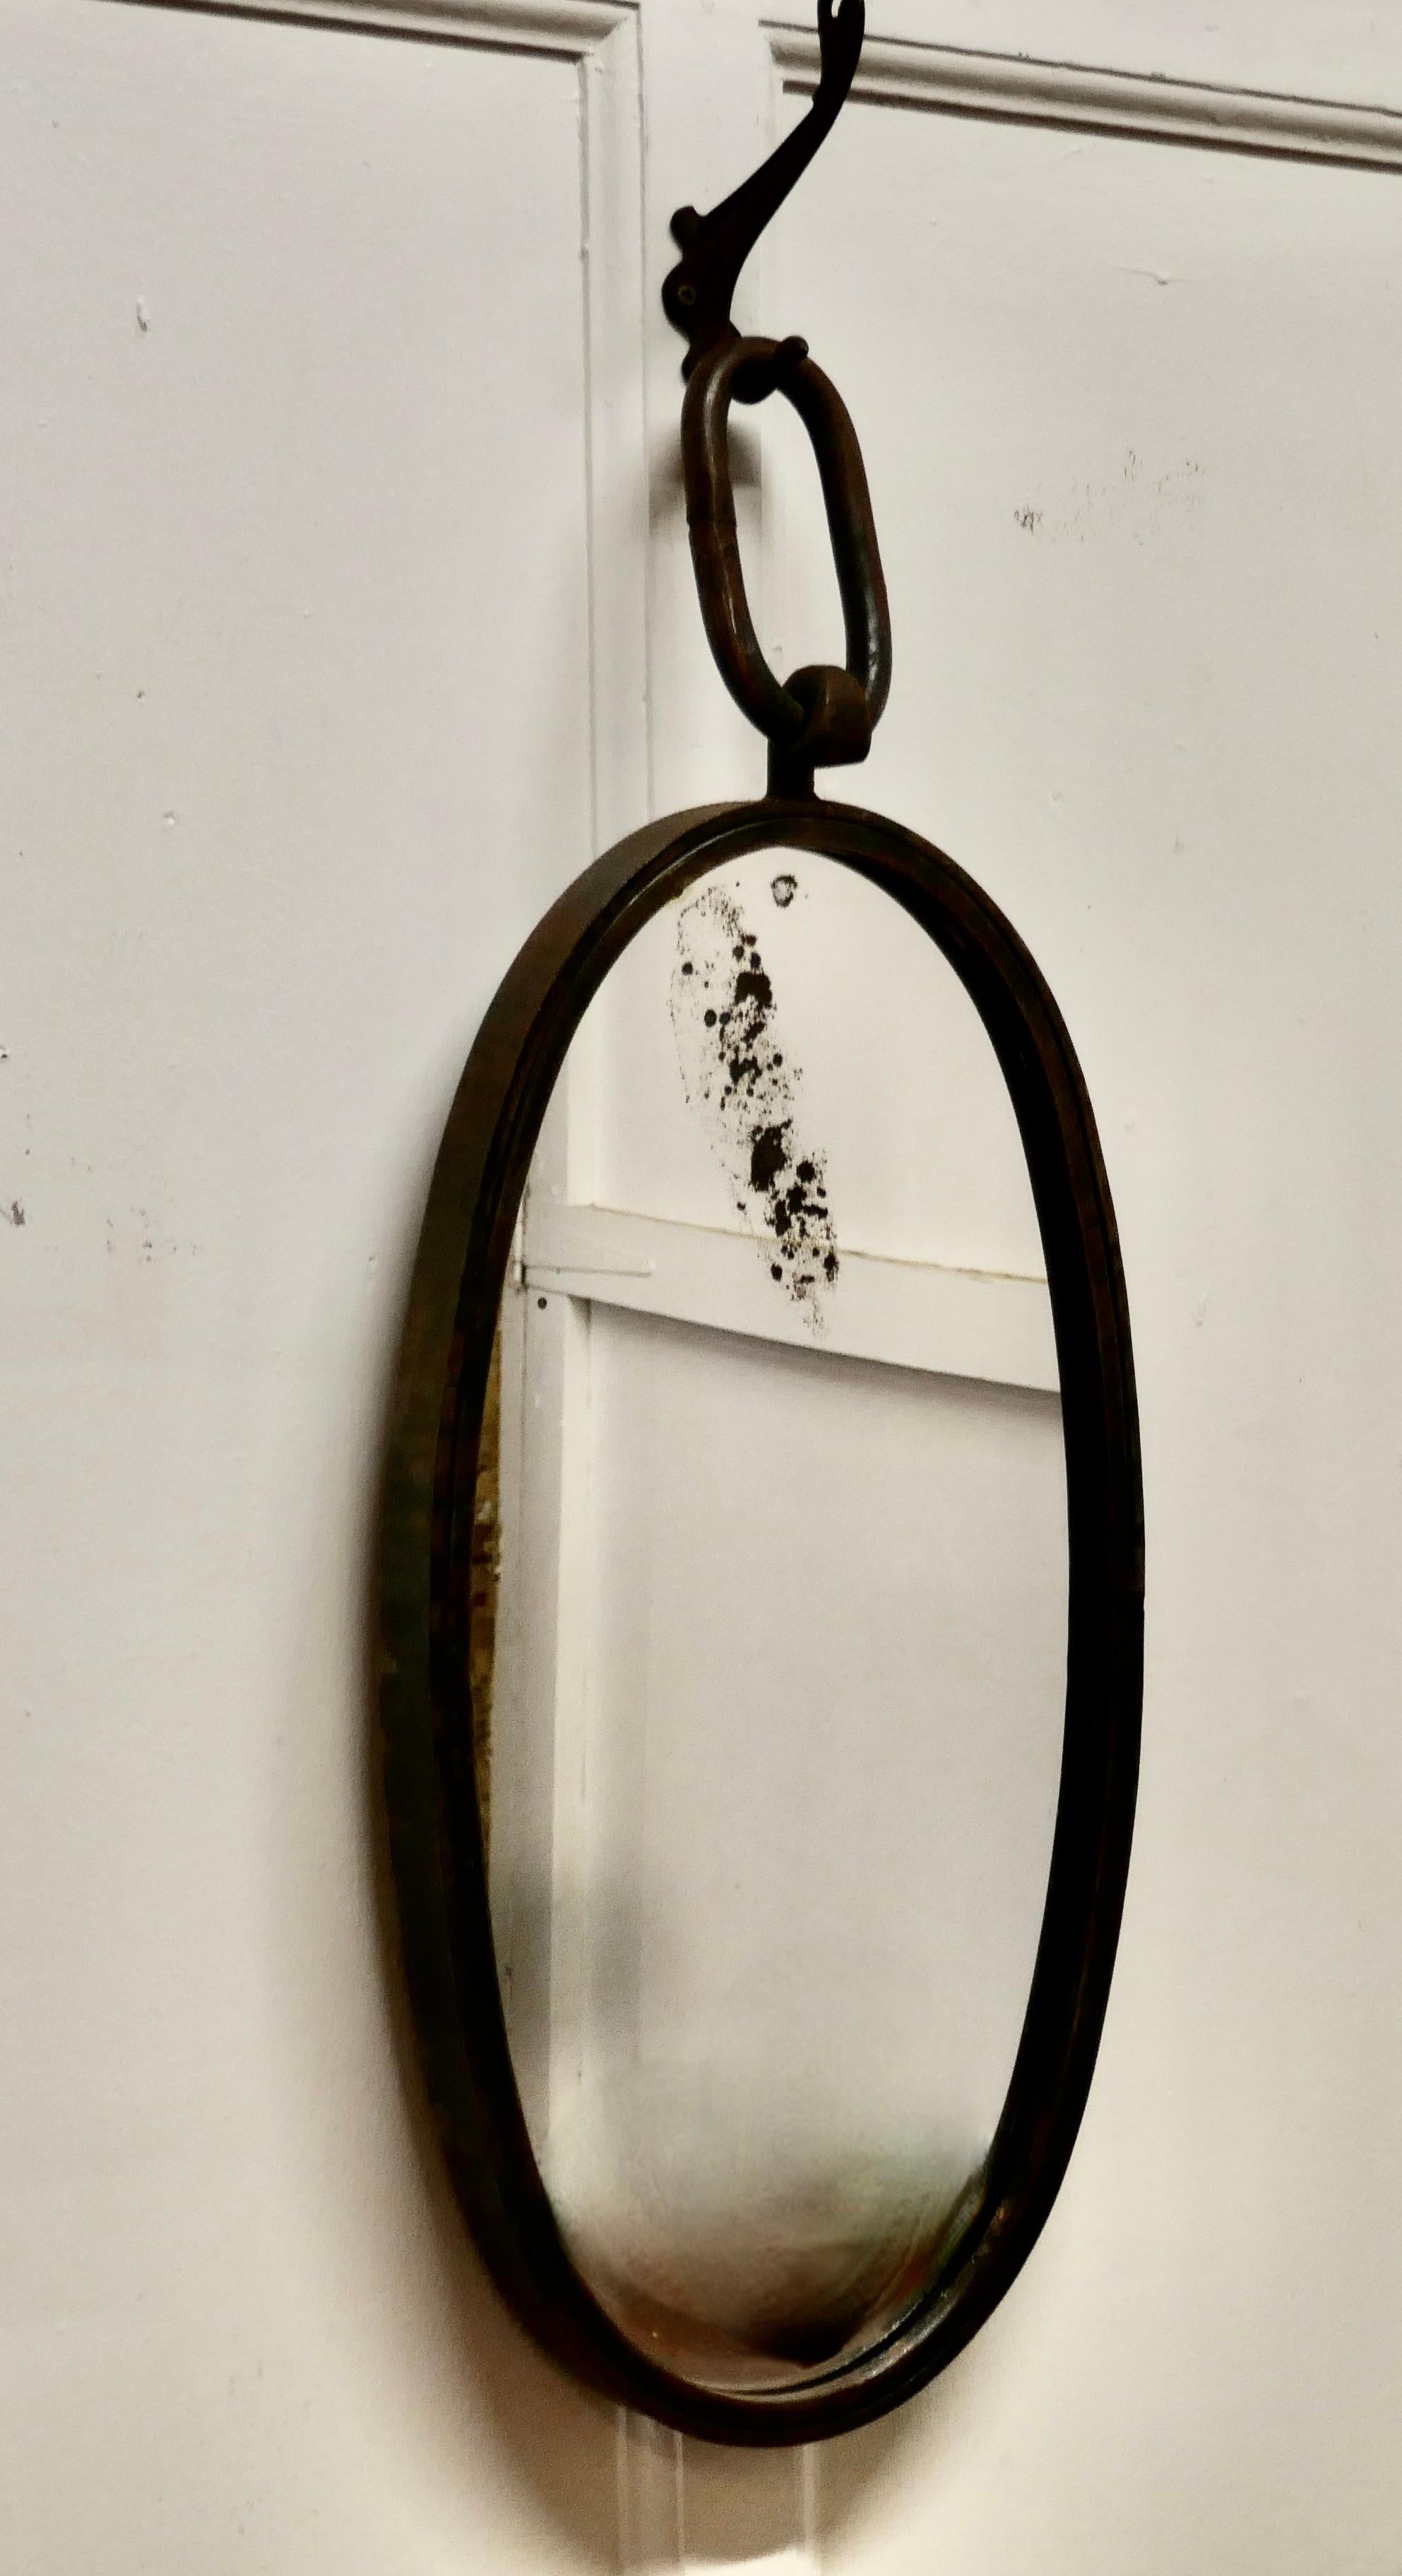 French Art Deco Brutalist oval iron ships mirror

This an Art Deco period piece it is oval in shape and resembles a ships block, it hangs on a large iron link
A great piece on a shipping theme with slightly rusty finish and a foxed patch near the